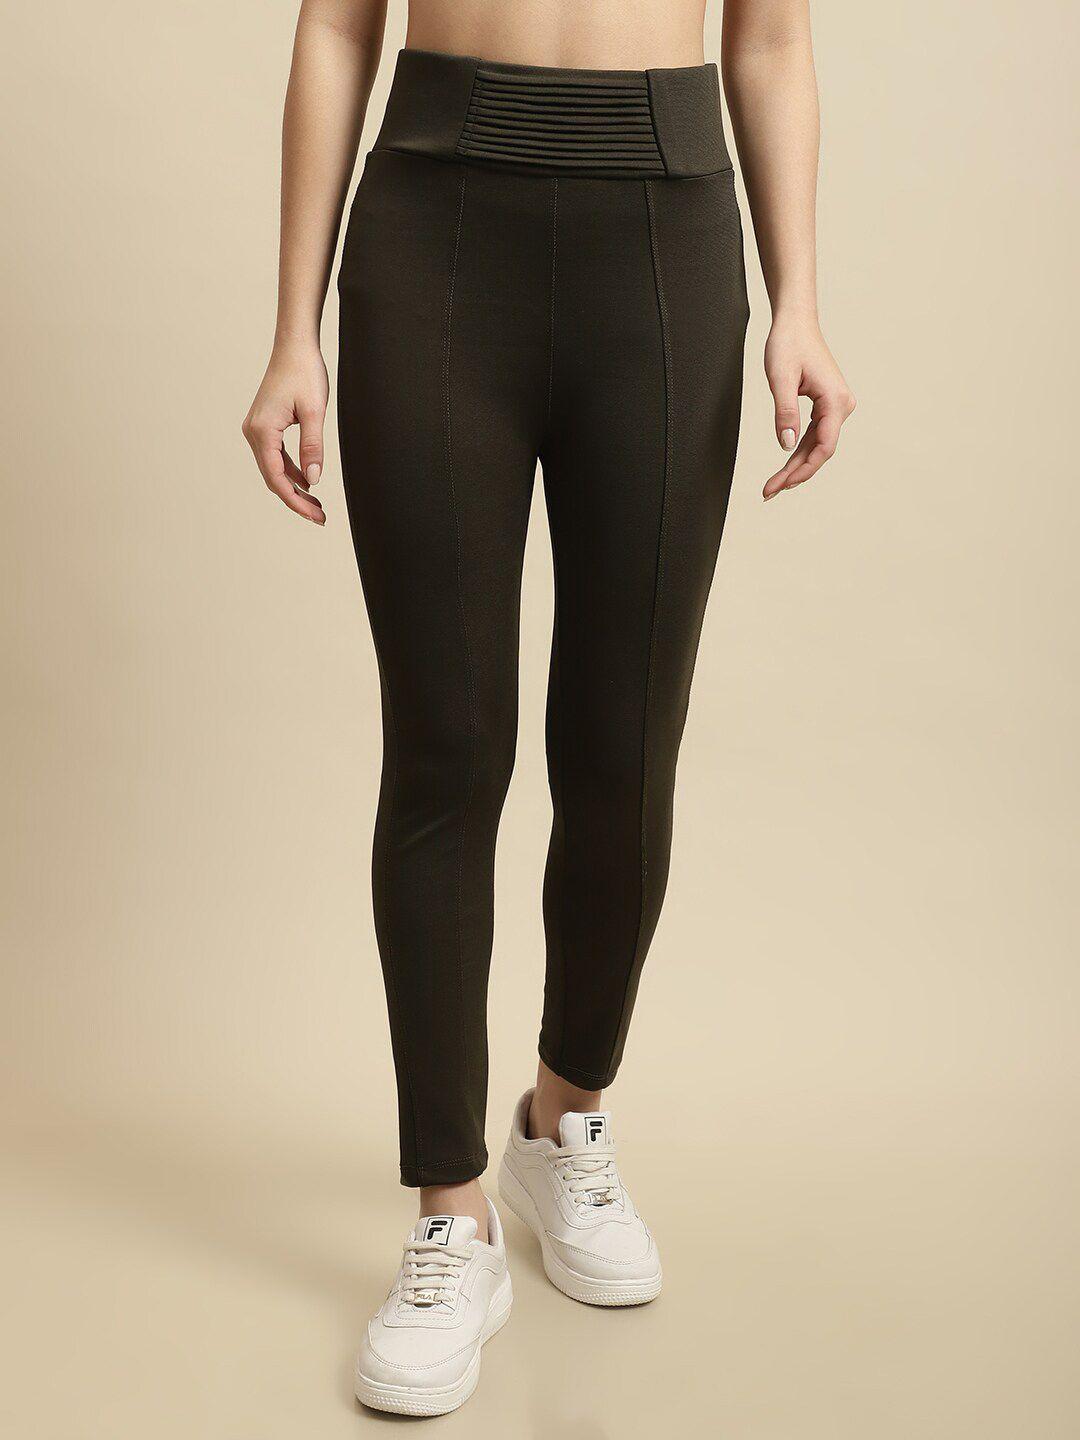 tag-7-women-skinny-fit-ankle-length-jeggings